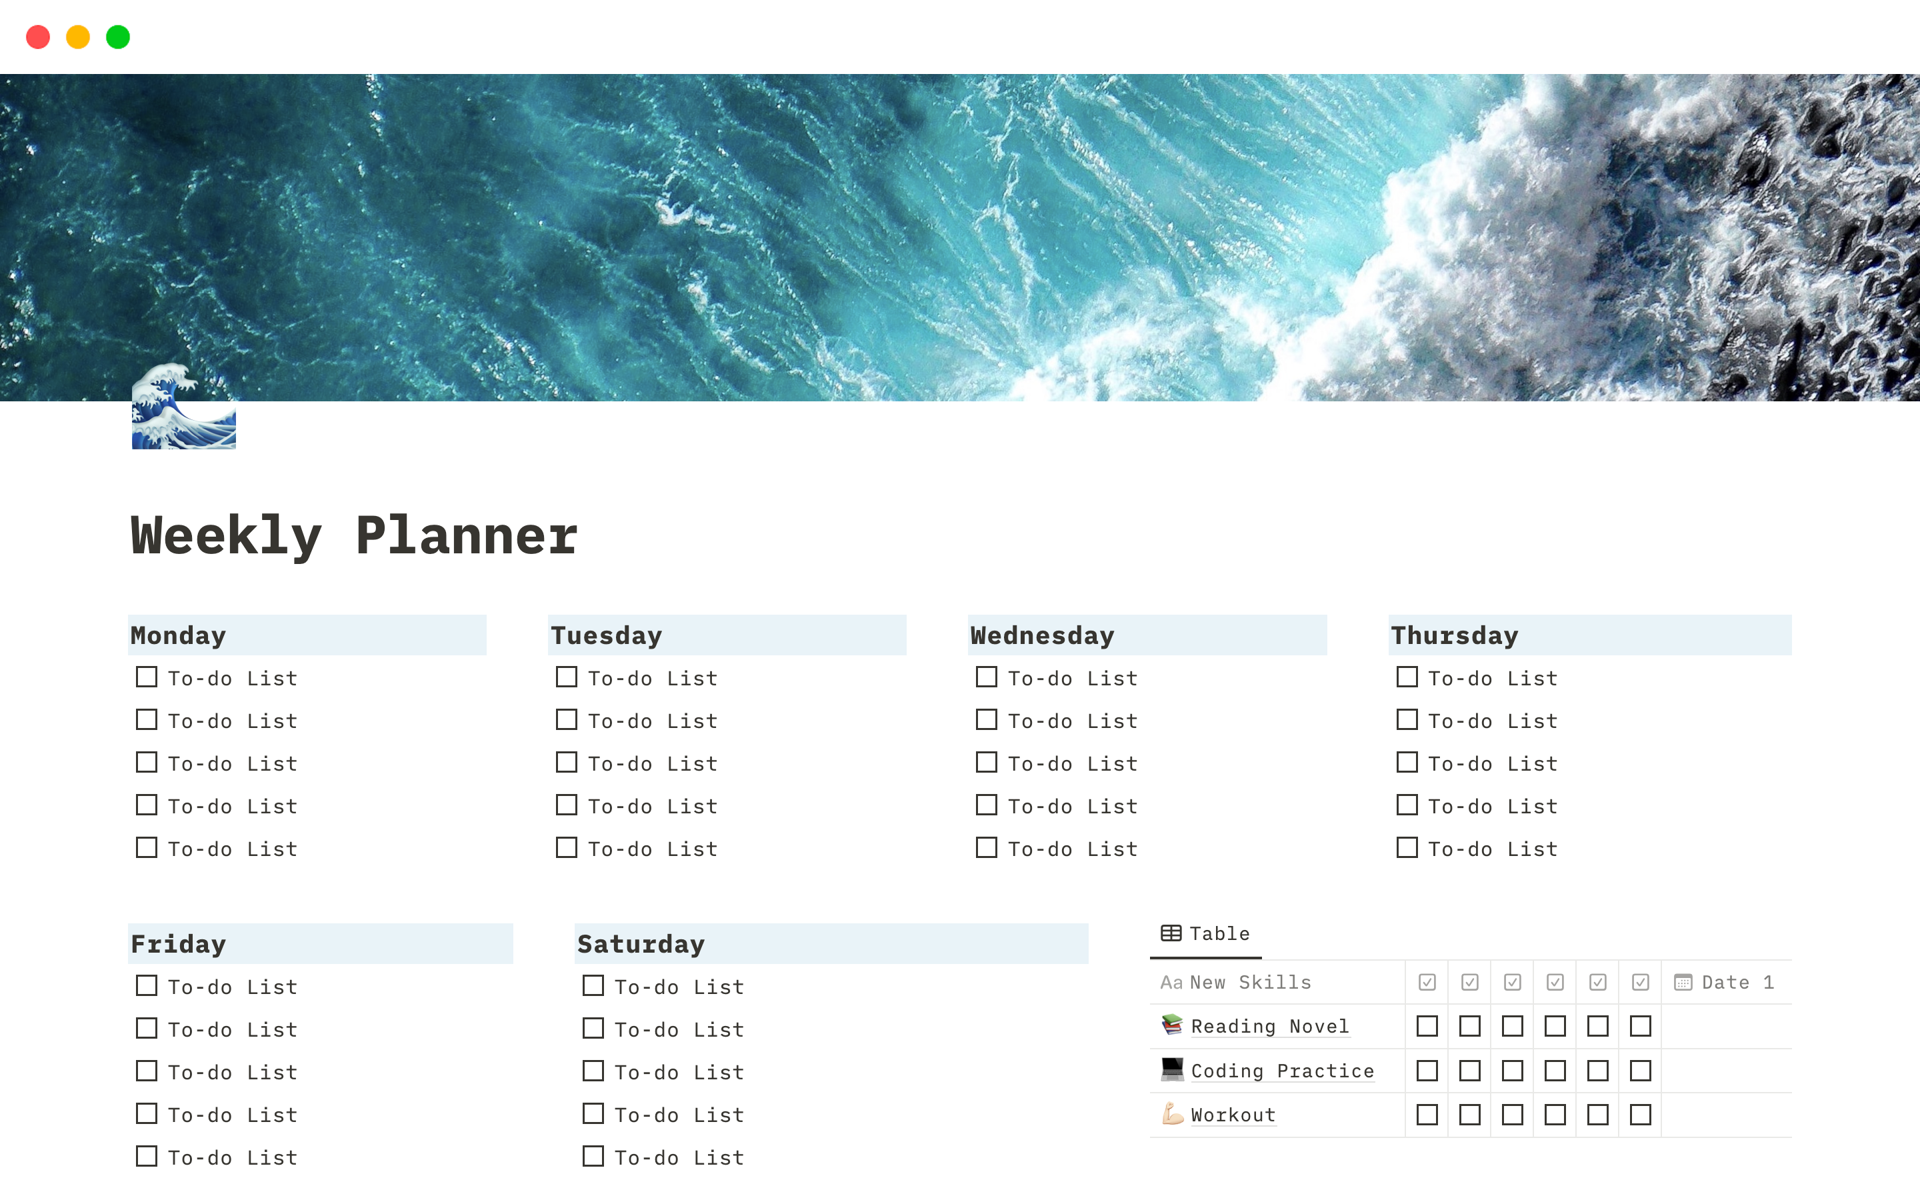 Dive into productivity and organization with our Ocean Waves Weekly Planner.